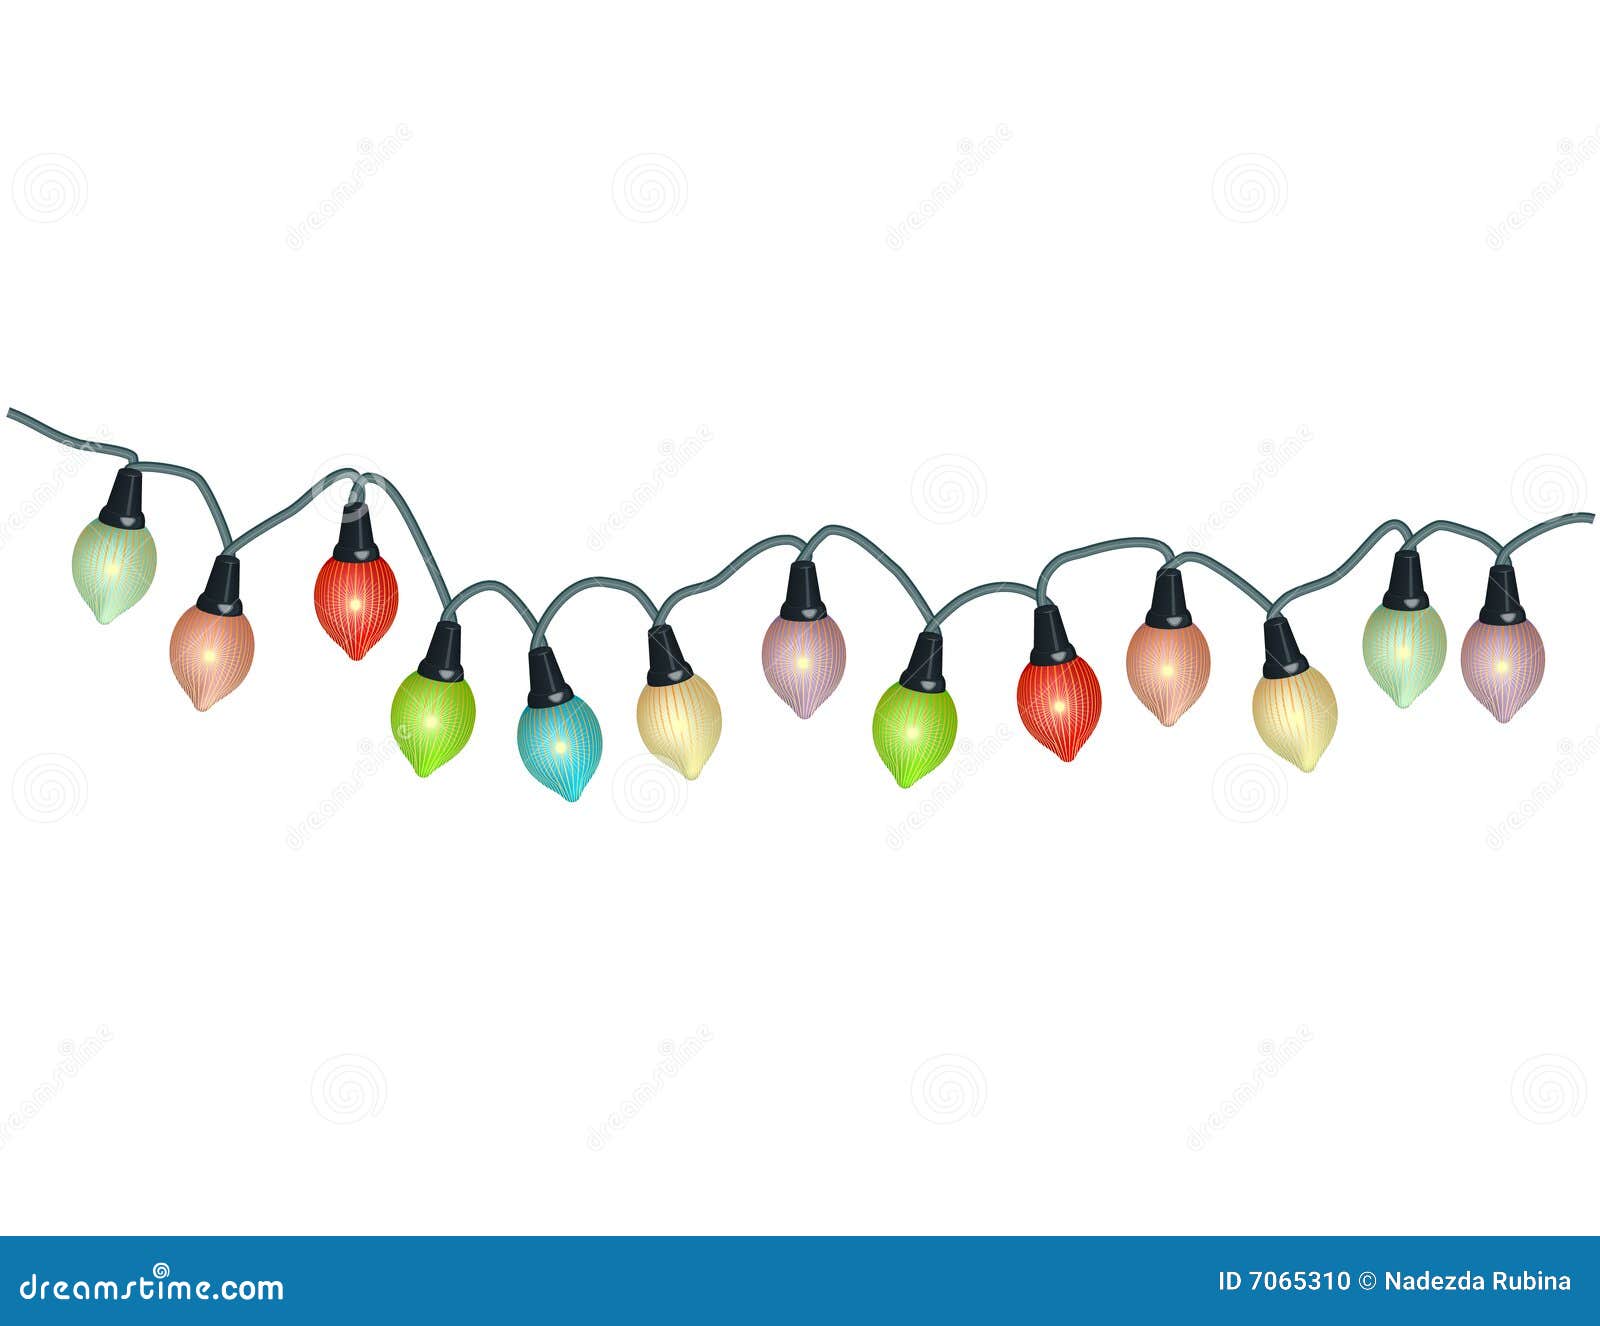 string of christmas lights clipart - photo #13